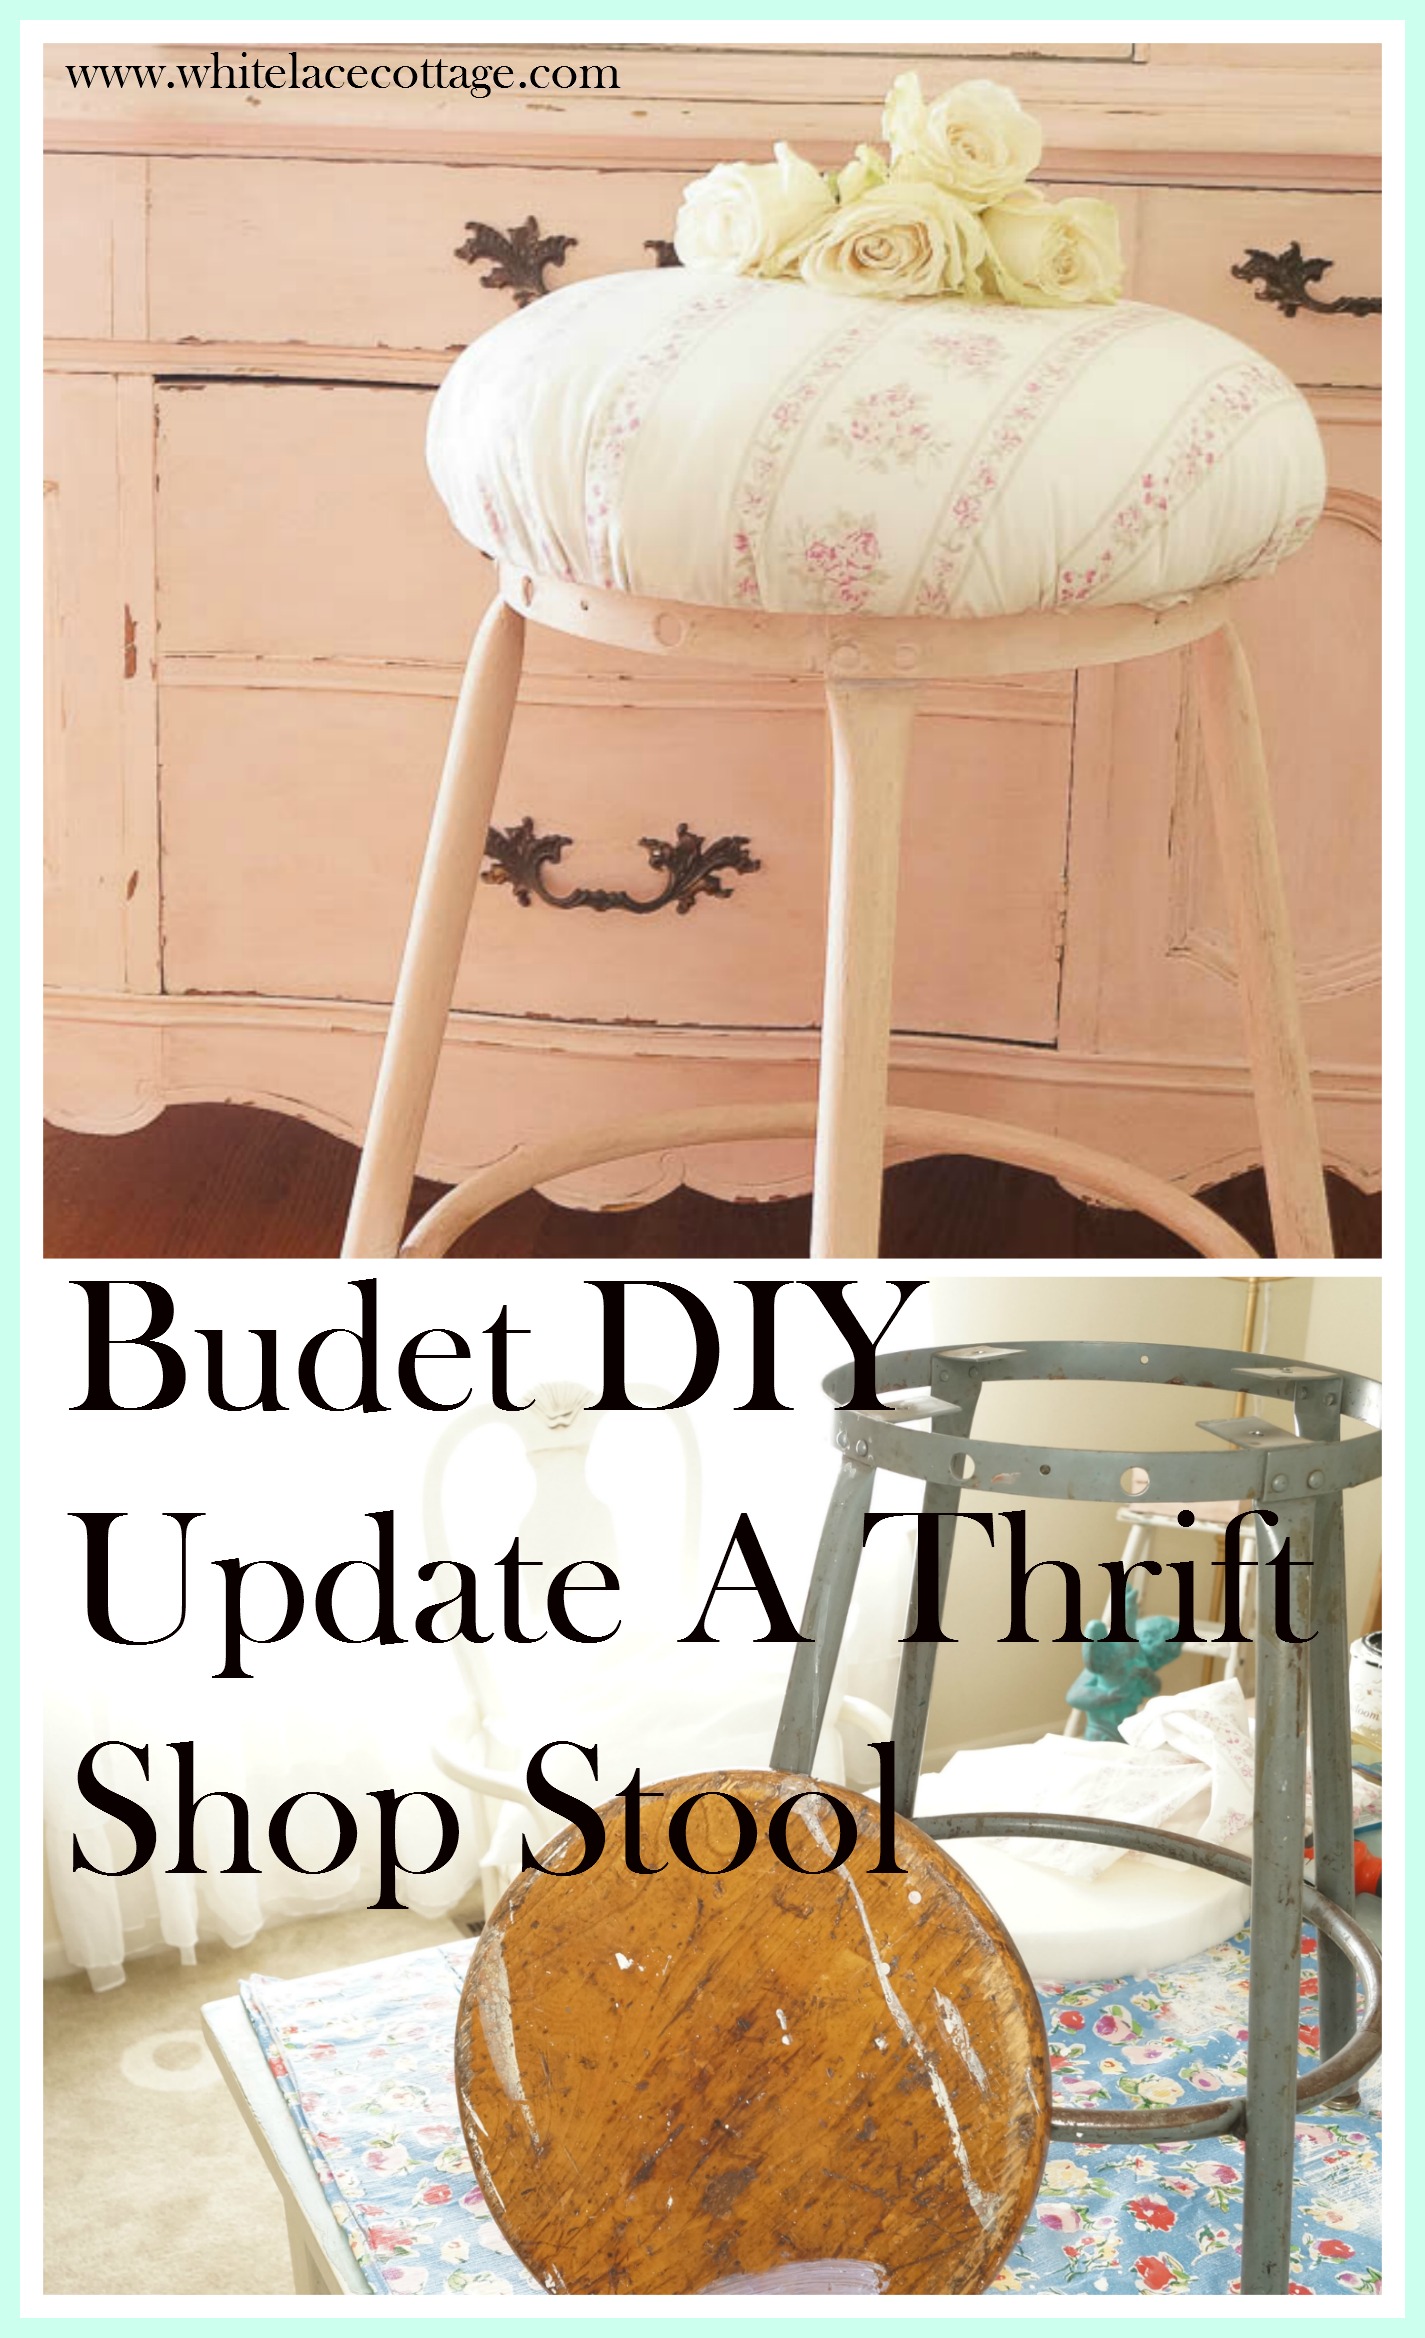 Here's a simple and cheap way of reupholstering a thrift shop stool. This cost me ZERO dollars to do!